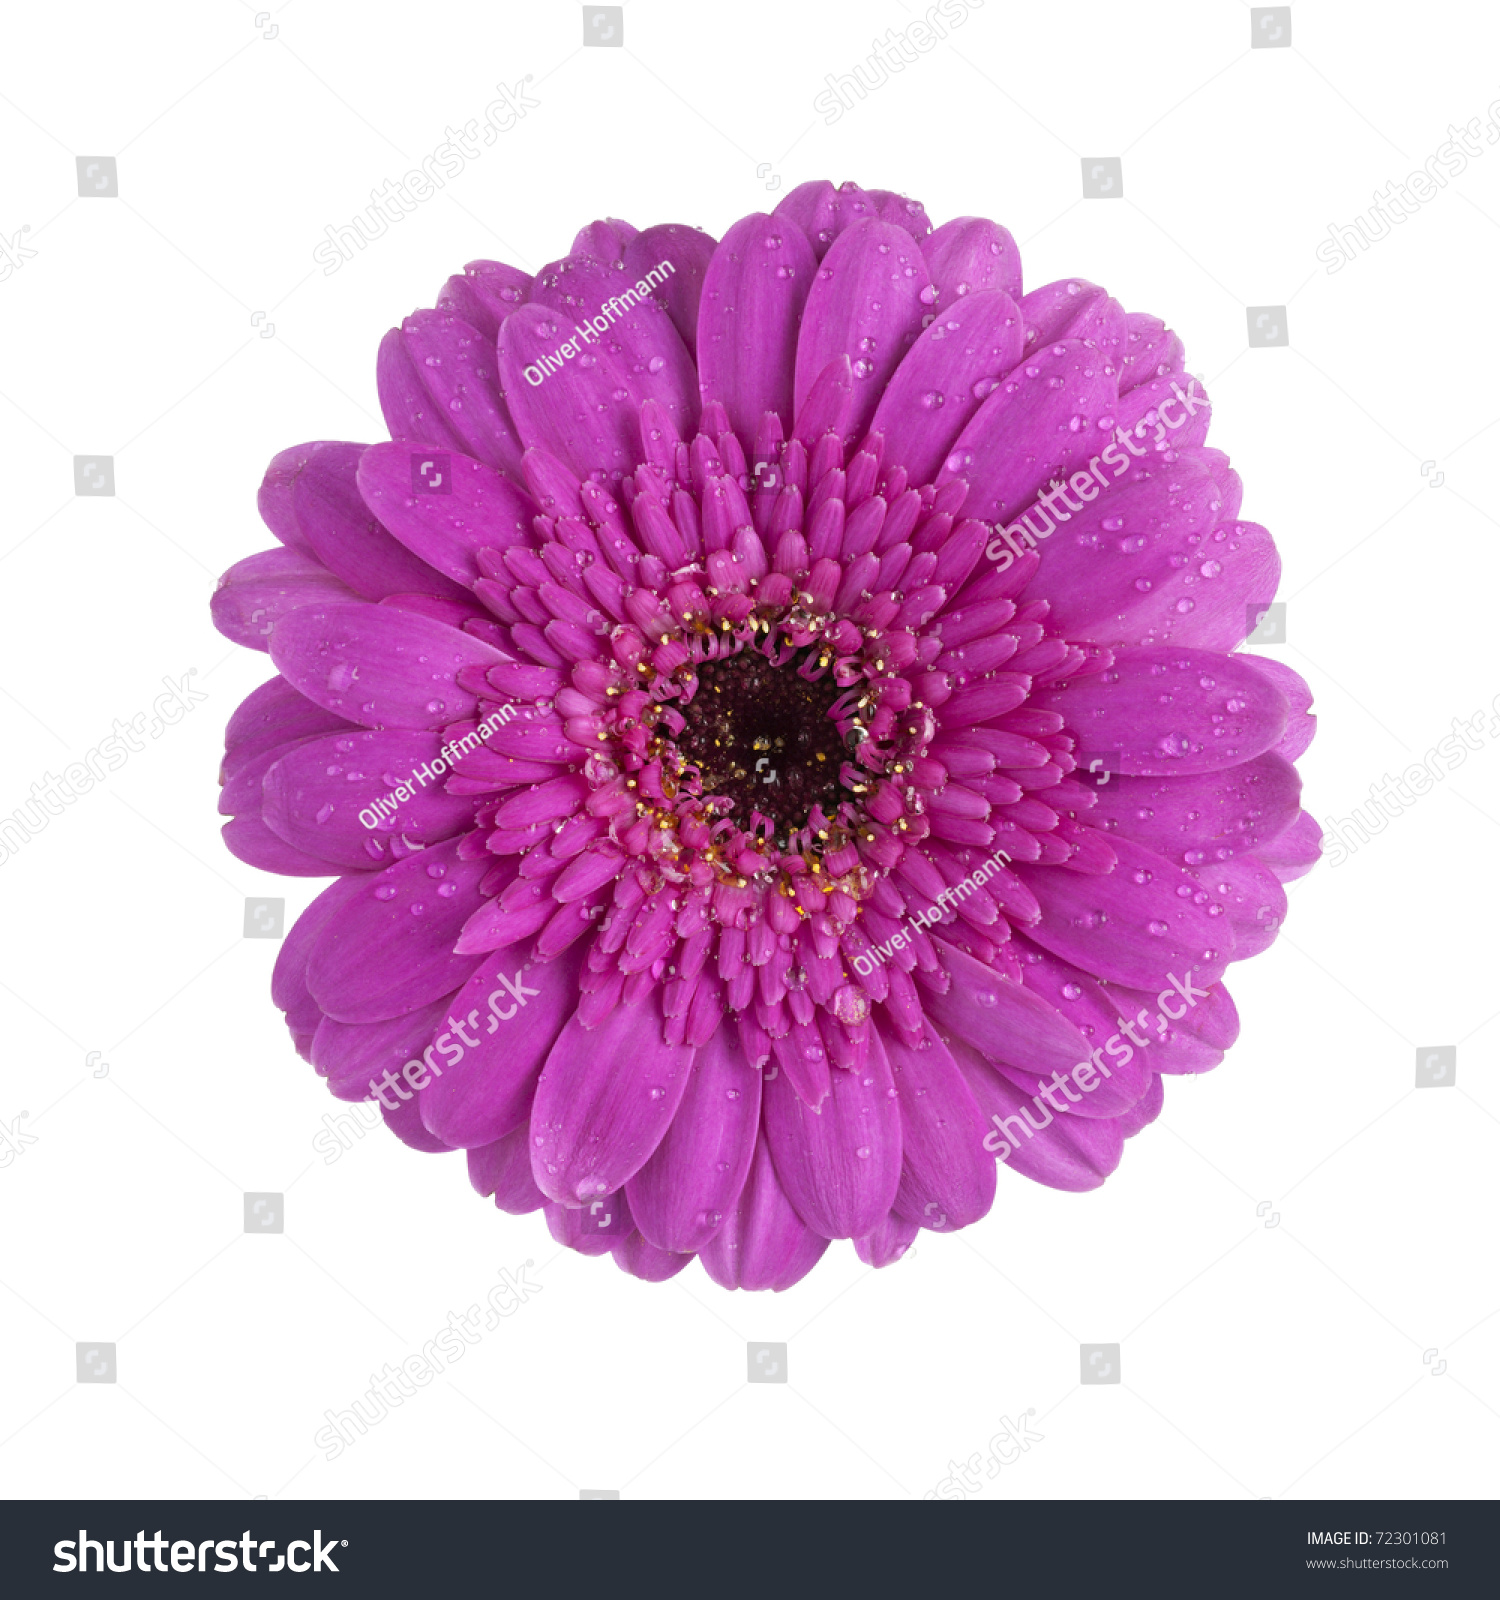 Purple Gerbera Daisy Blossom With Dew Drops Isolated On White ...